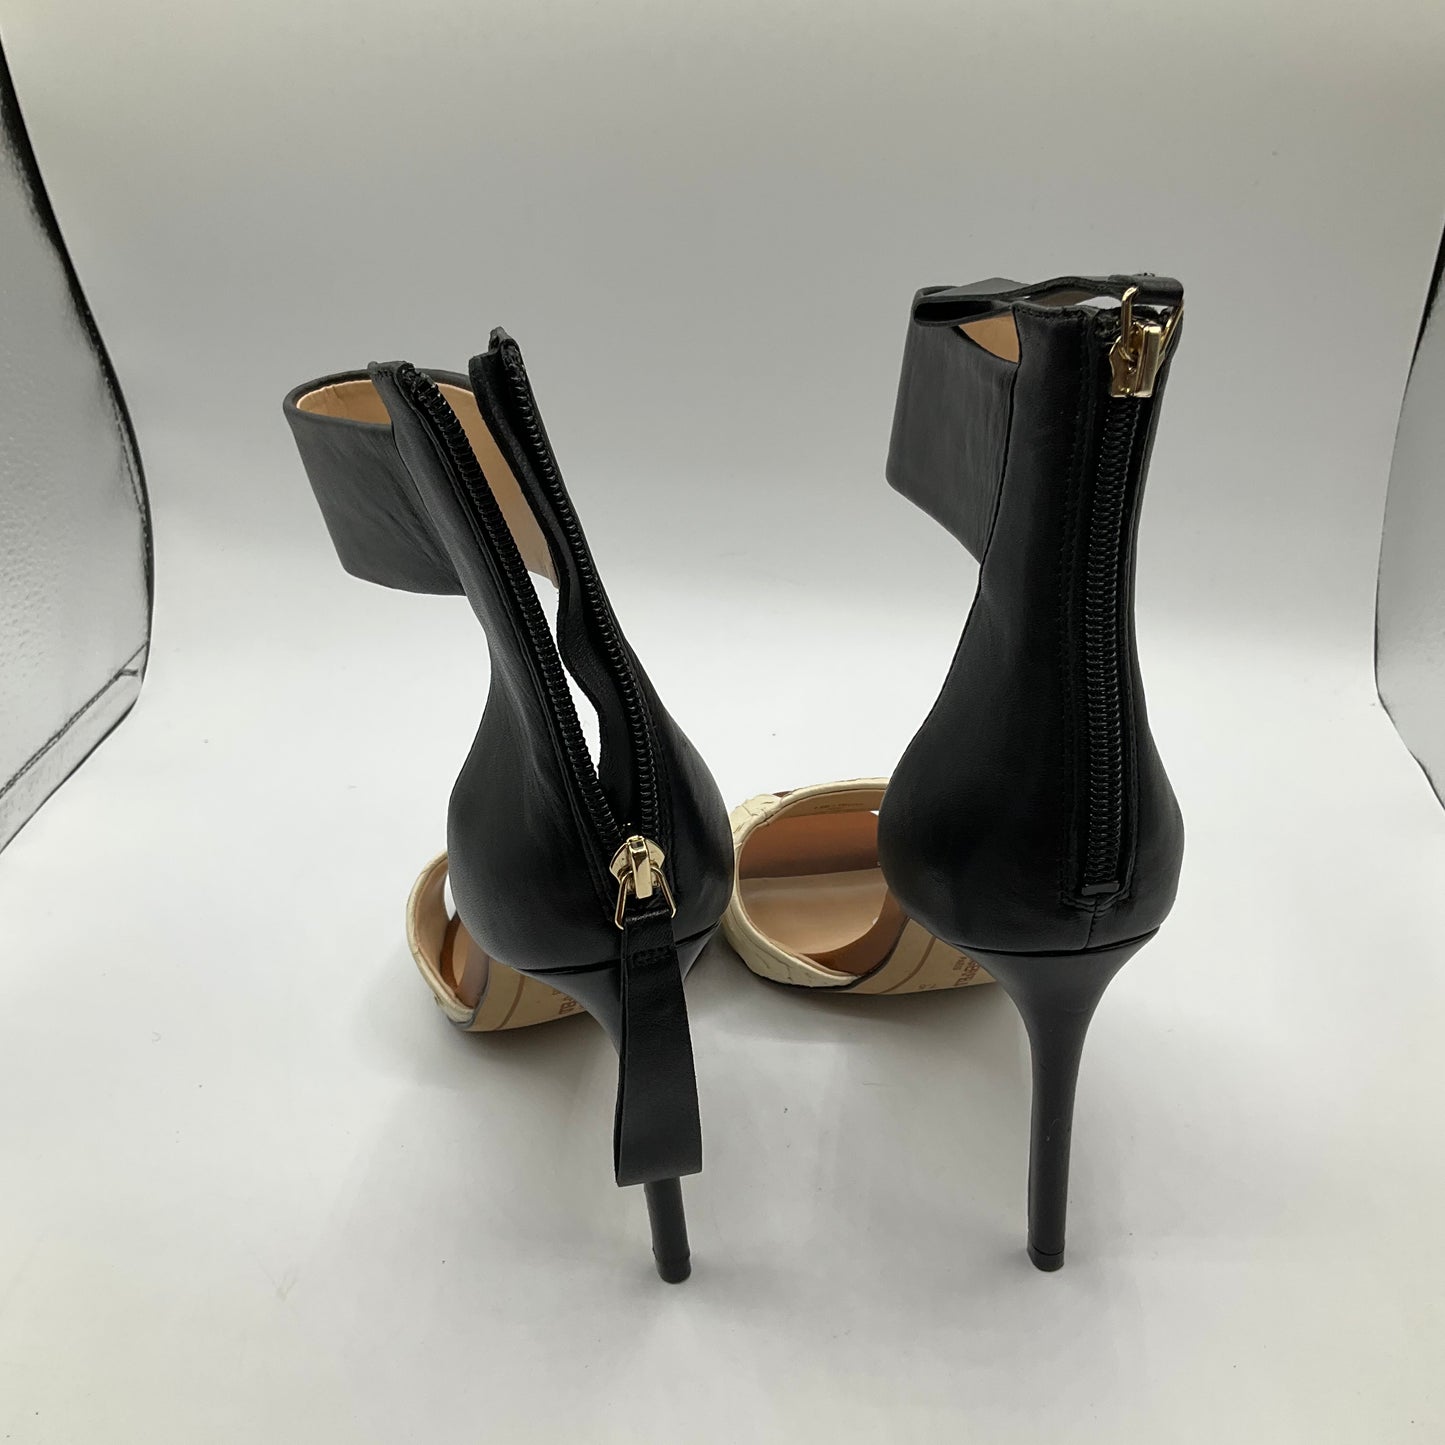 Shoes Heels Stiletto By Karl Lagerfeld  Size: 7.5